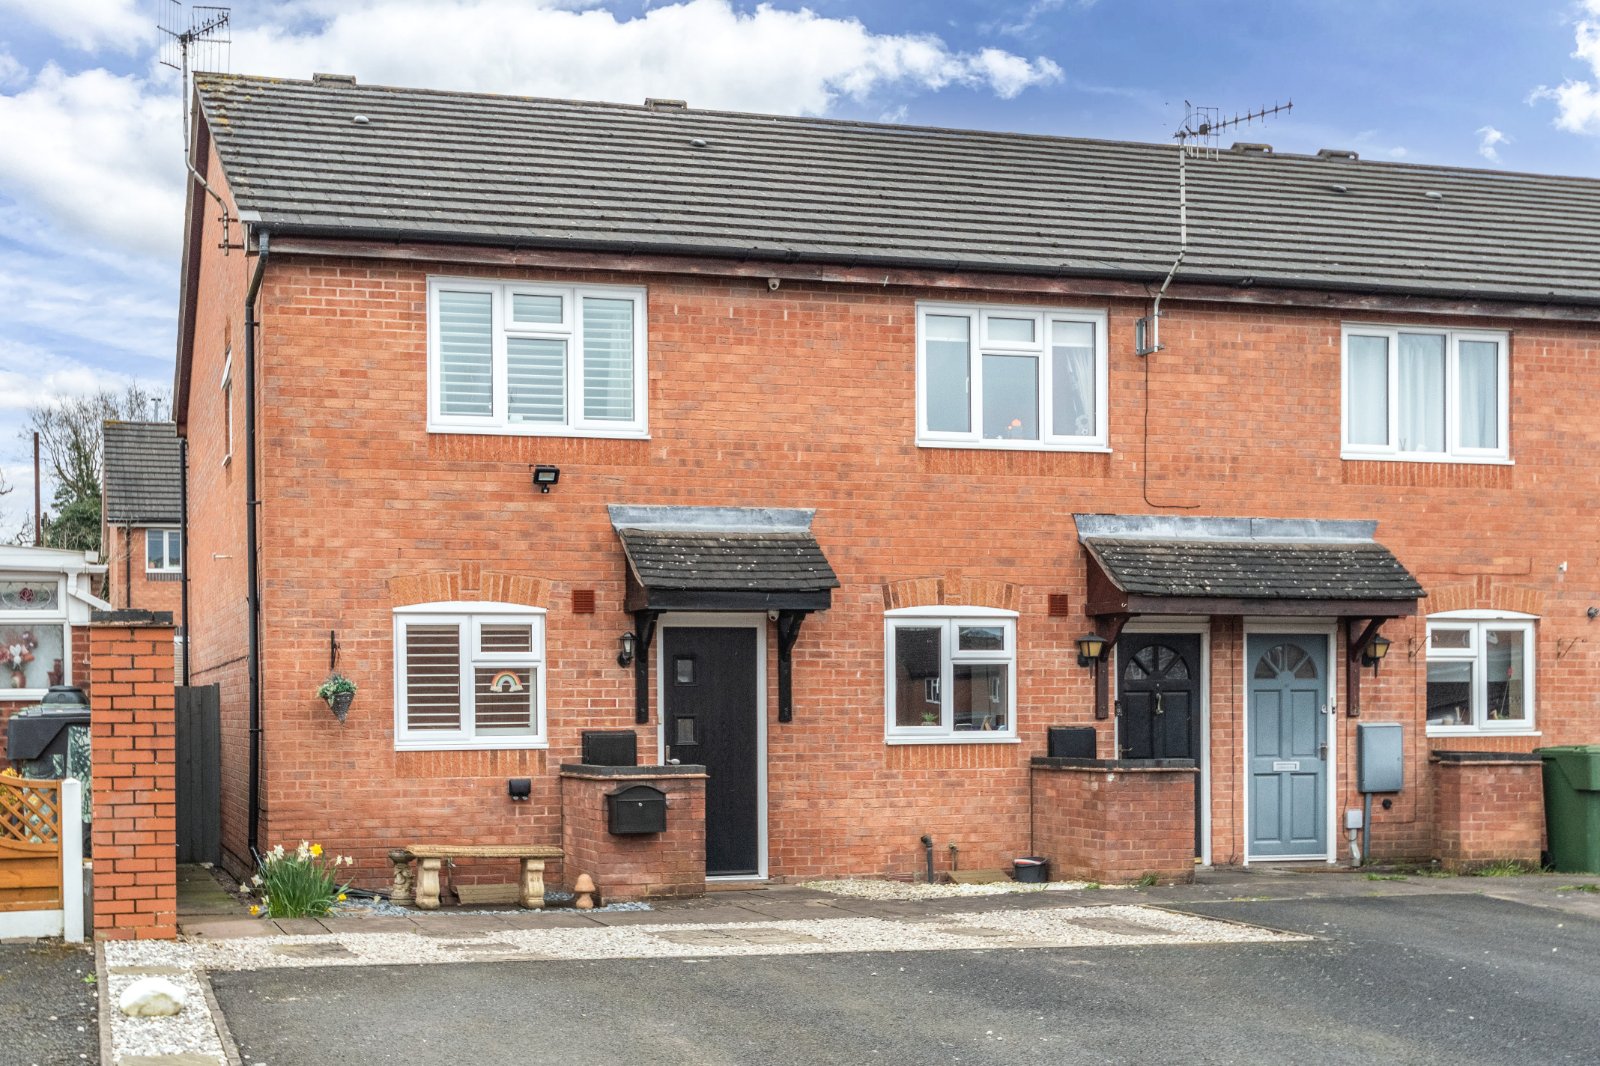 2 bed house for sale in Acorn Road, Catshill - Property Image 1